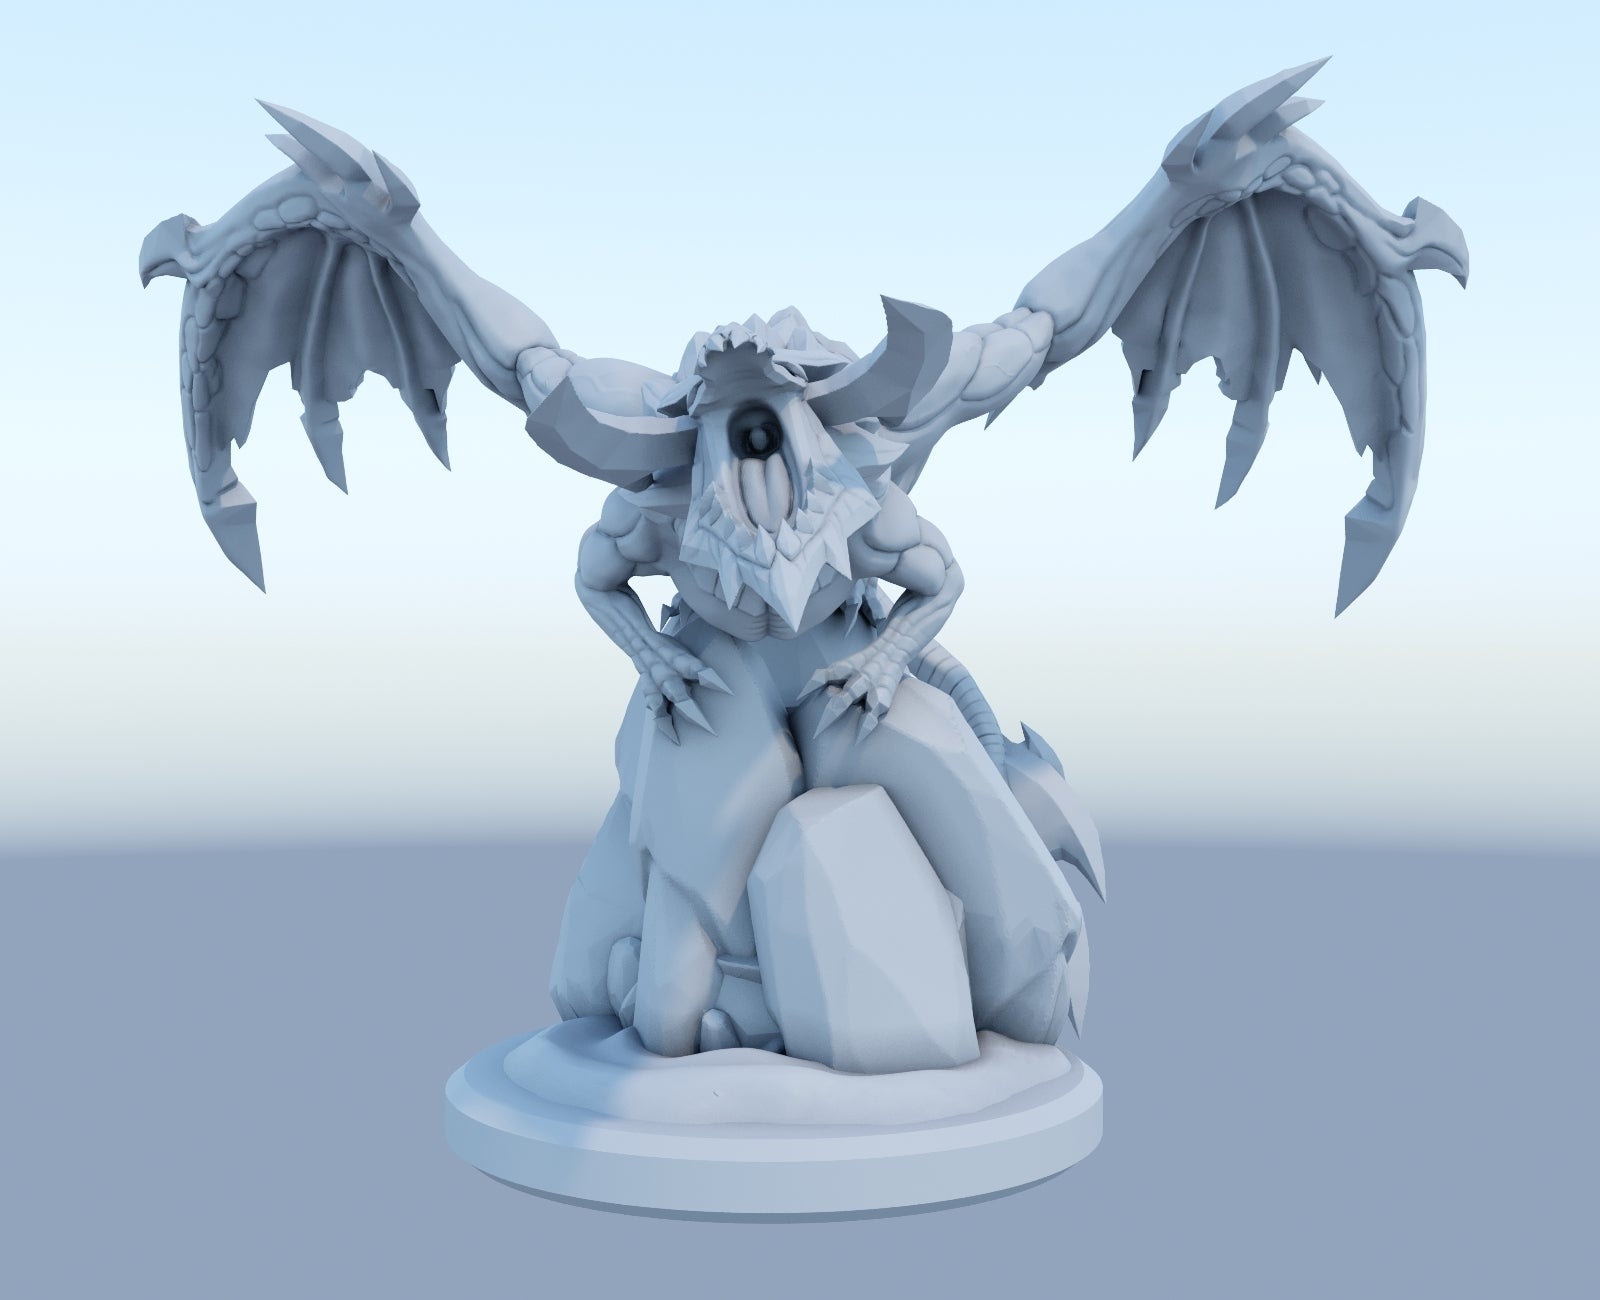 Elder dragon 3D-printed League of Legends champion figure. Decorate your gaming setup or home with your favorite League of Legends champion! Choose between the unpainted version, perfect for you to paint yourself, or the hand-painted version by a professional painter. Order your figure today!